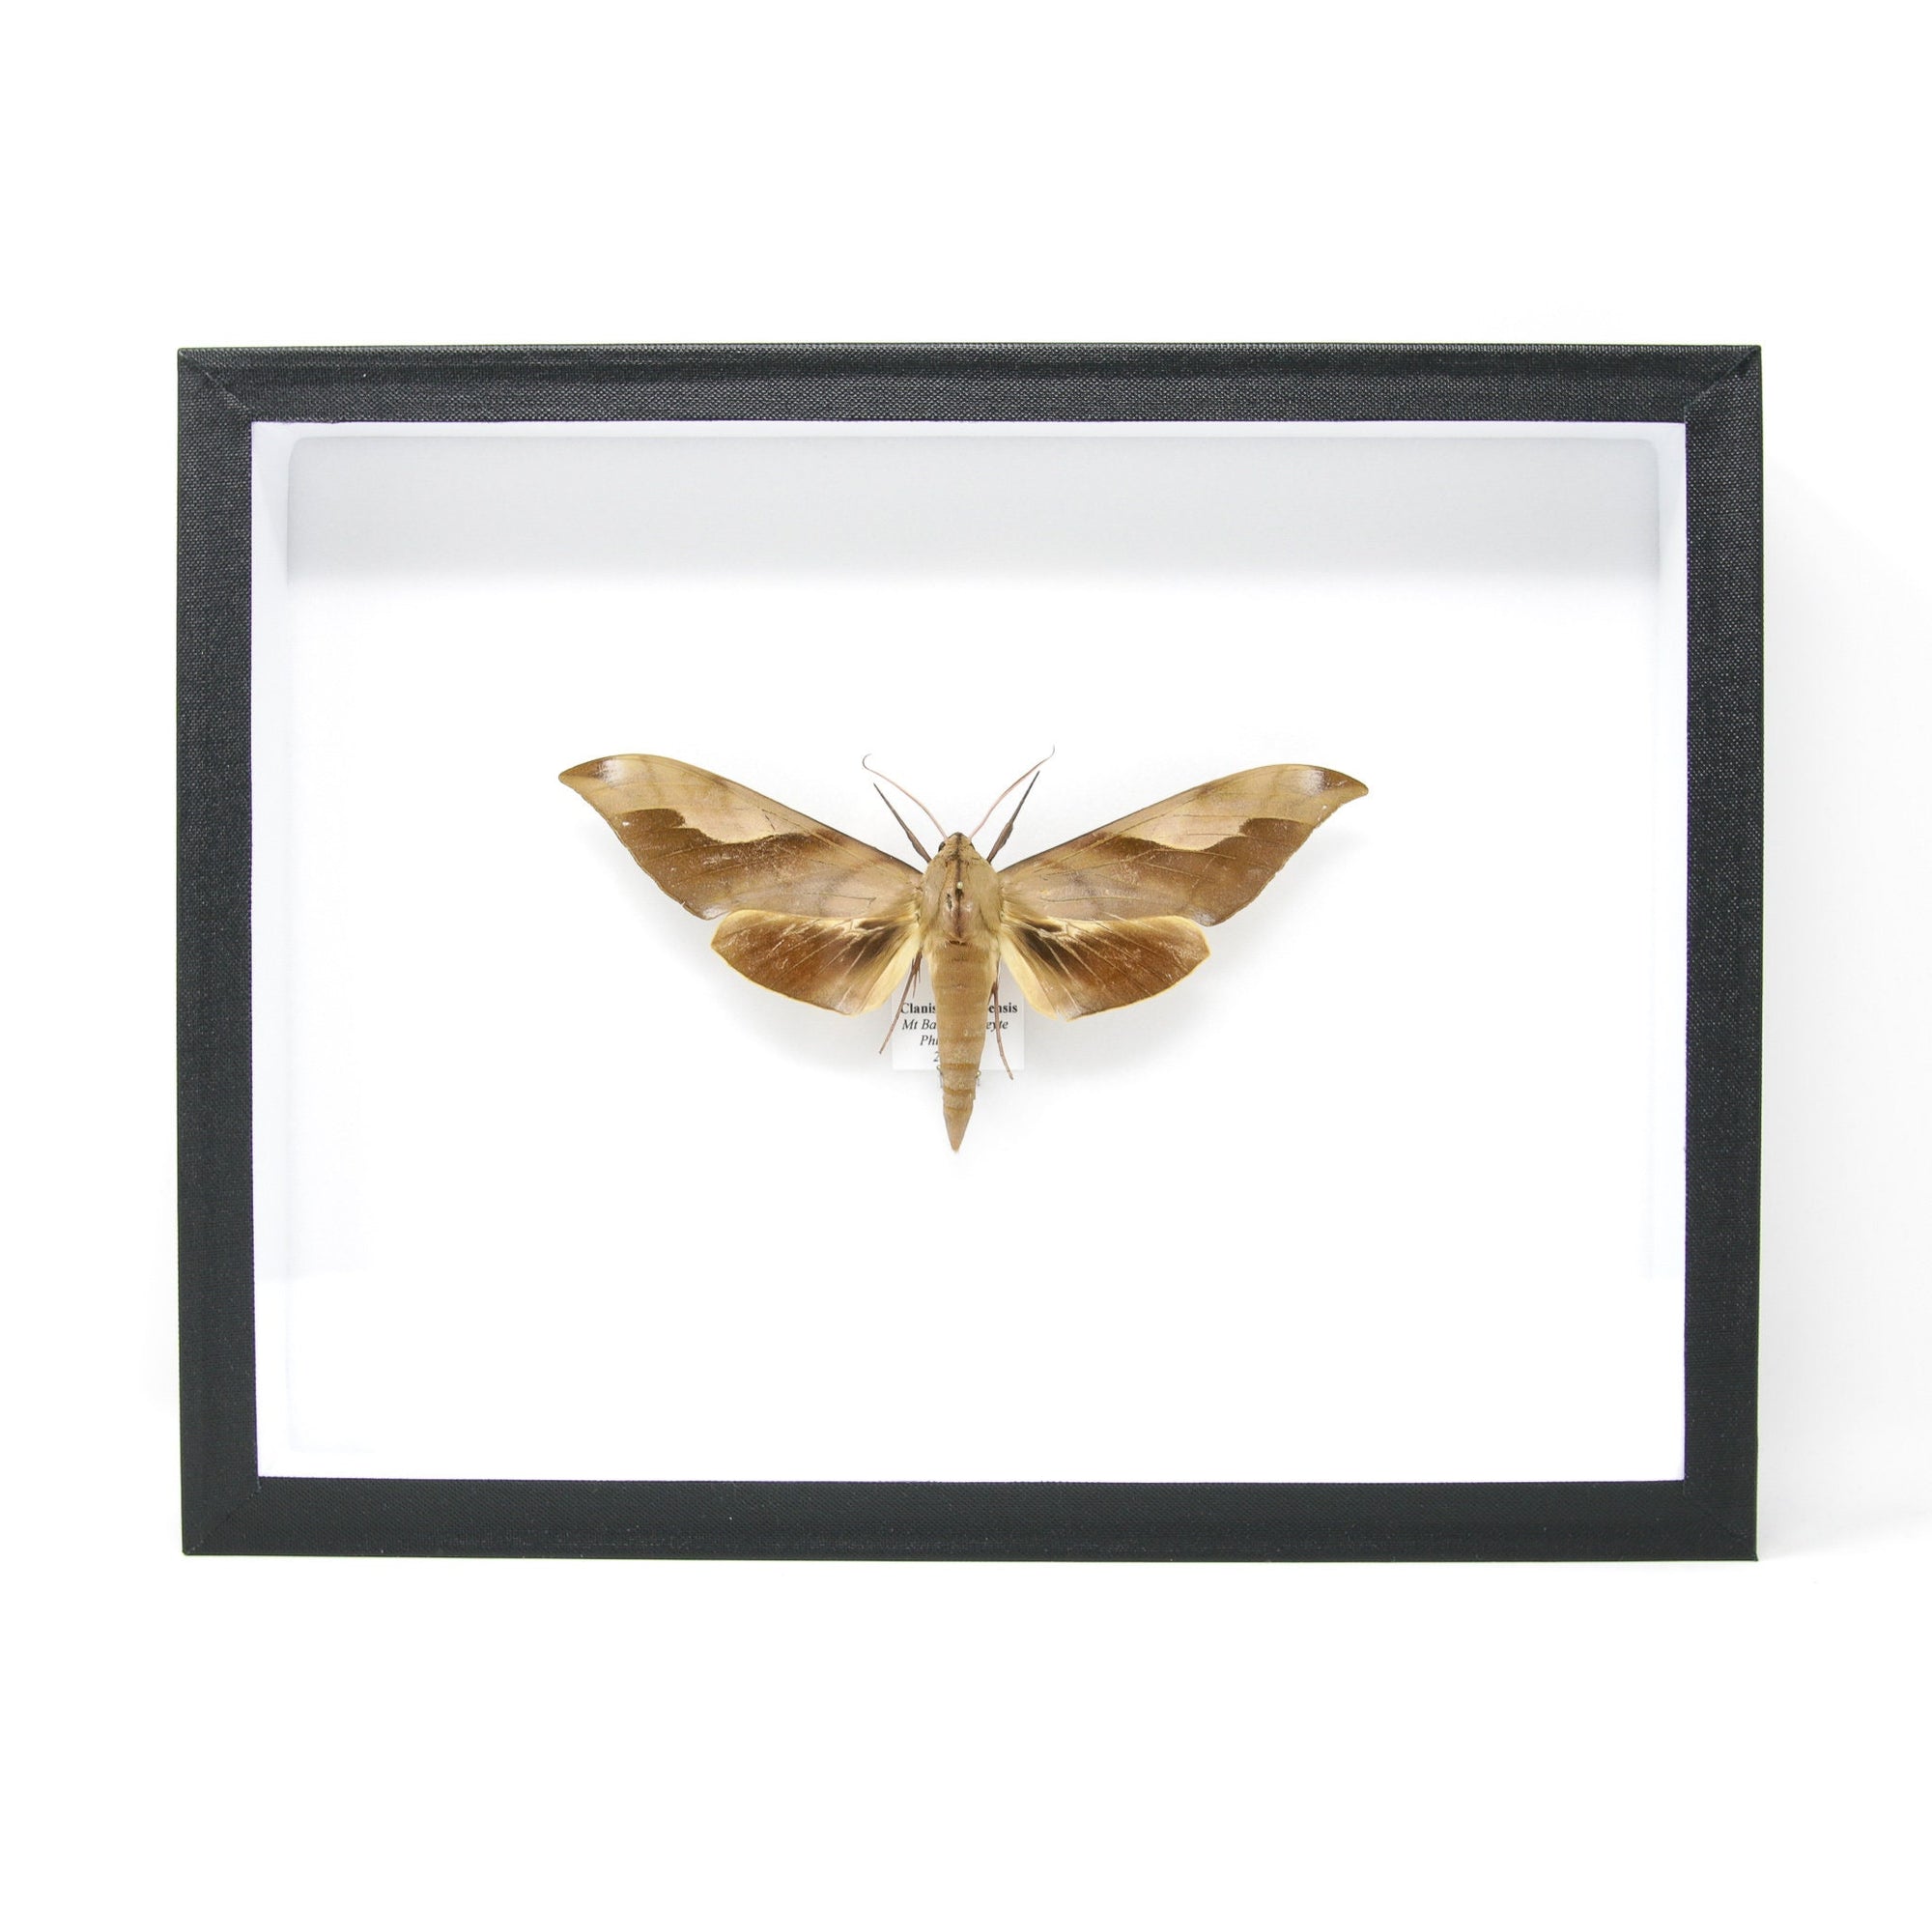 Hawkmoth Set Pinned Specimens | Moth Mounted in Entomology Box Frame with Scientific Collection Data | 11.8x9x2 inch (300×230×55 mm) A1